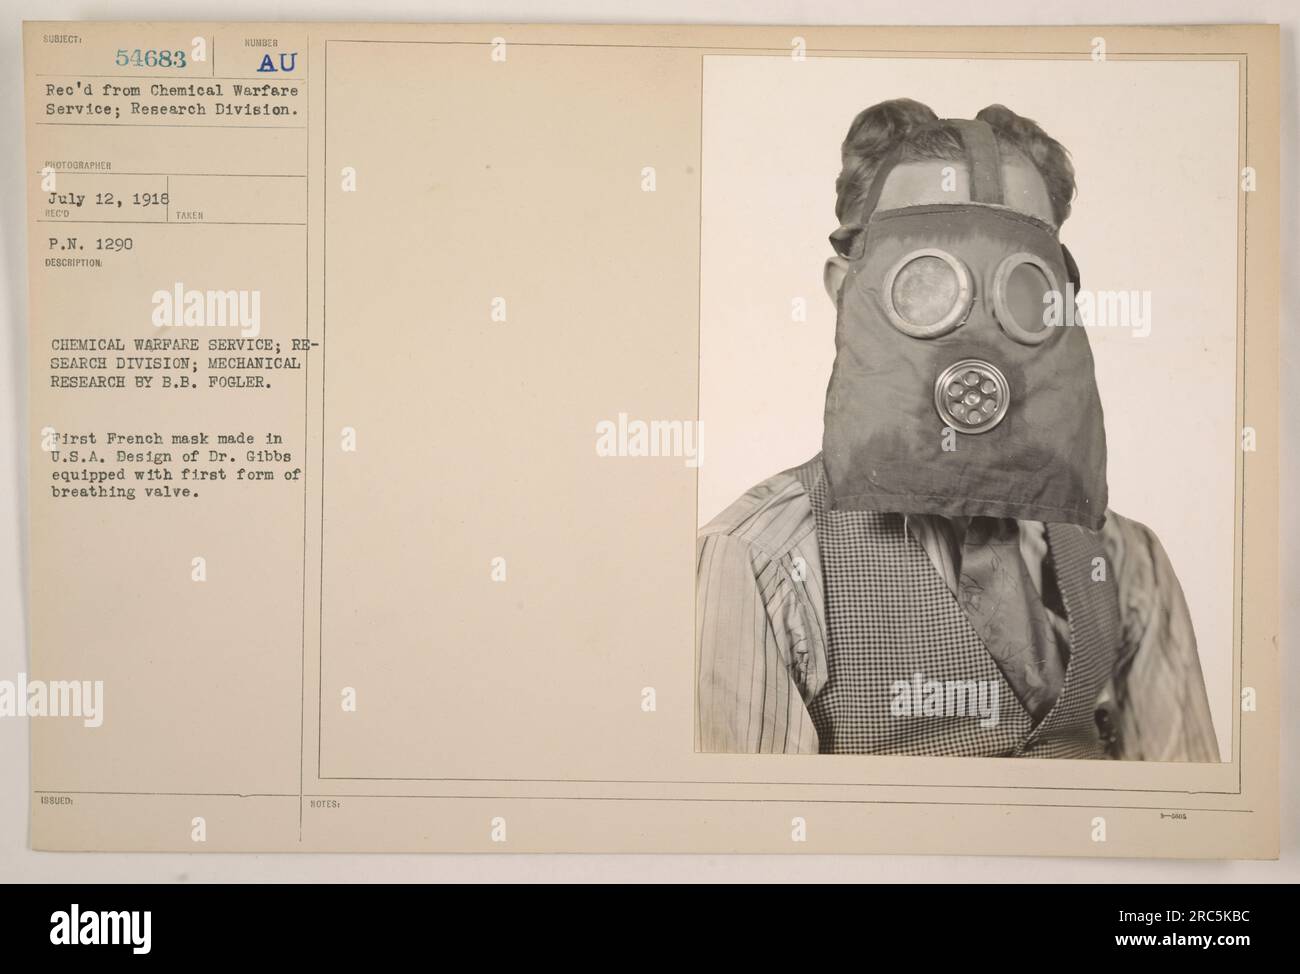 Photograph taken on July 12, 1918, showing the Mechanical Research conducted by B.B. Fogler at the Chemical Warfare Service; Research Division. It features the first French mask made in the U.S.A., based on the design of Dr. Gibbs, equipped with the initial form of a breathing valve. (Notes indicate 20, but no further context is given) Stock Photo